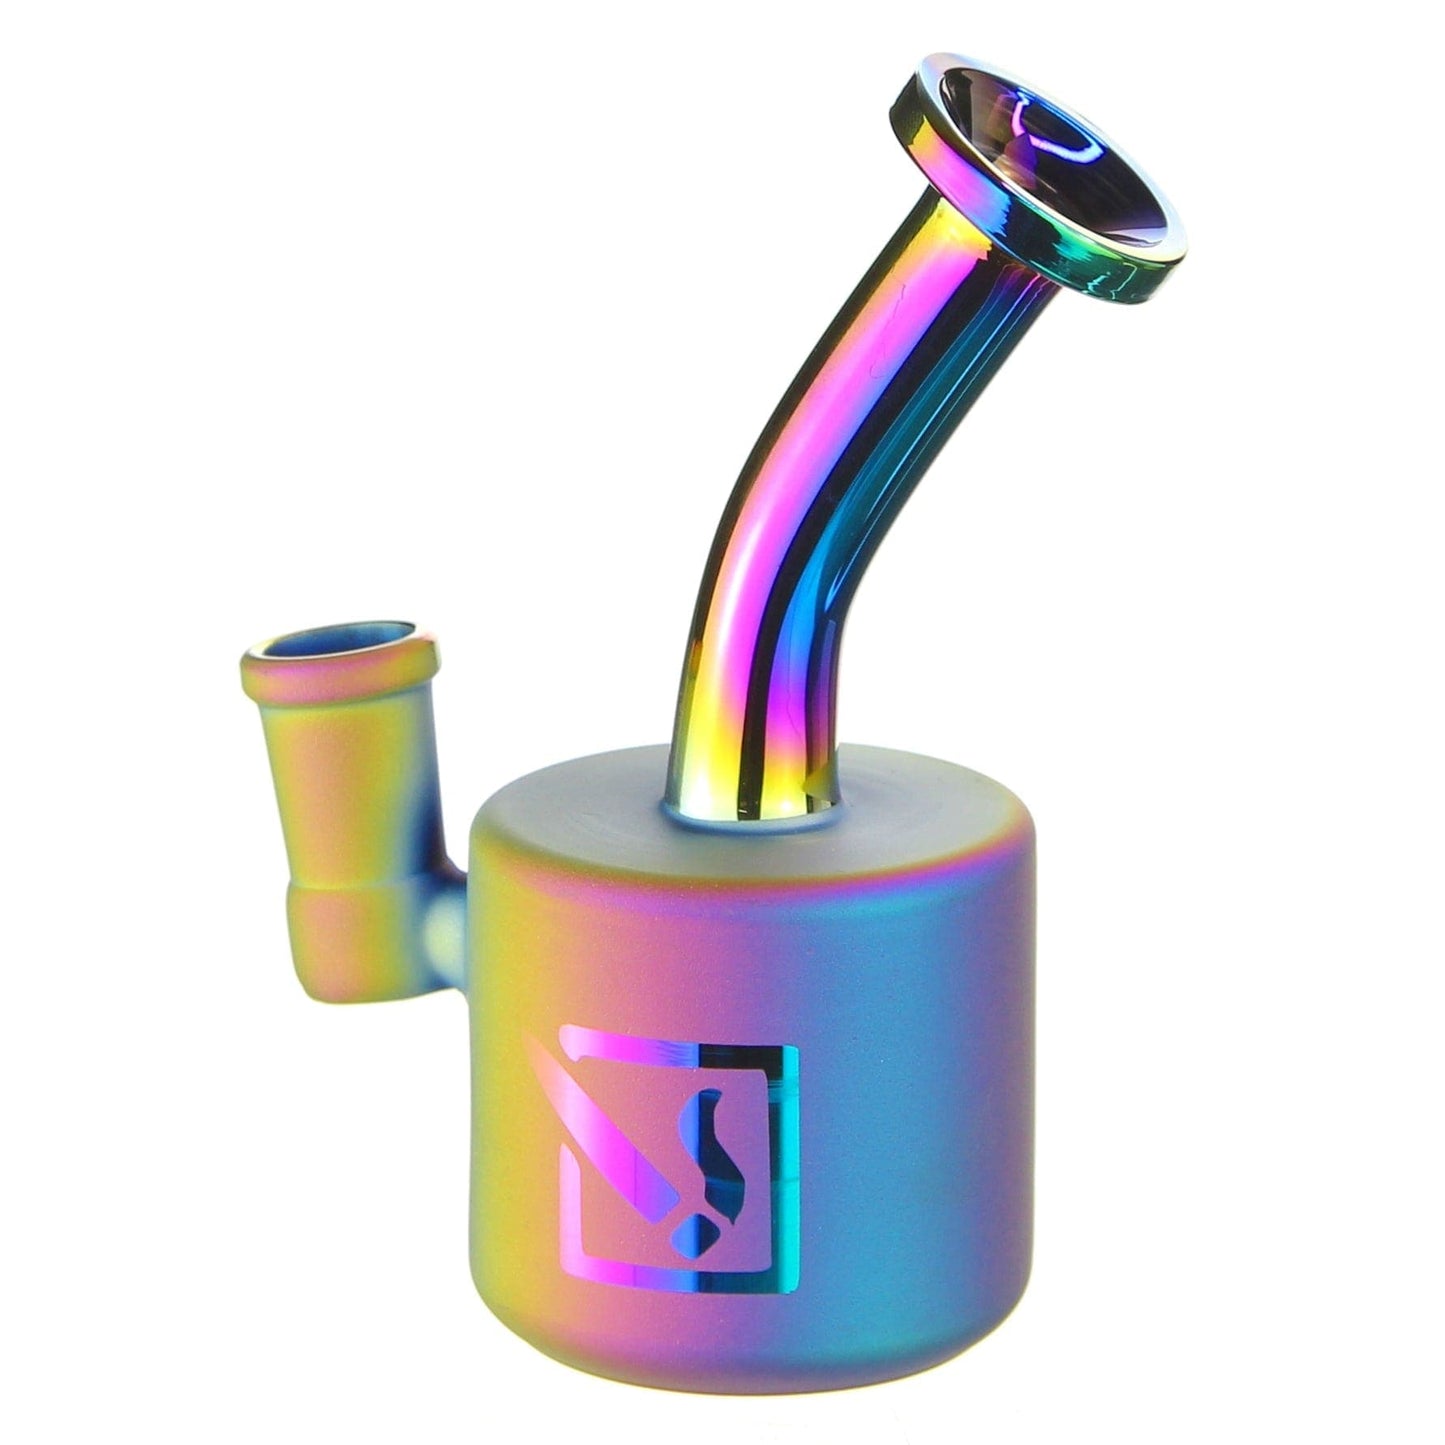 Daily High Club "Dabbers Delight Puck" Bong Best Sales Price - Bongs